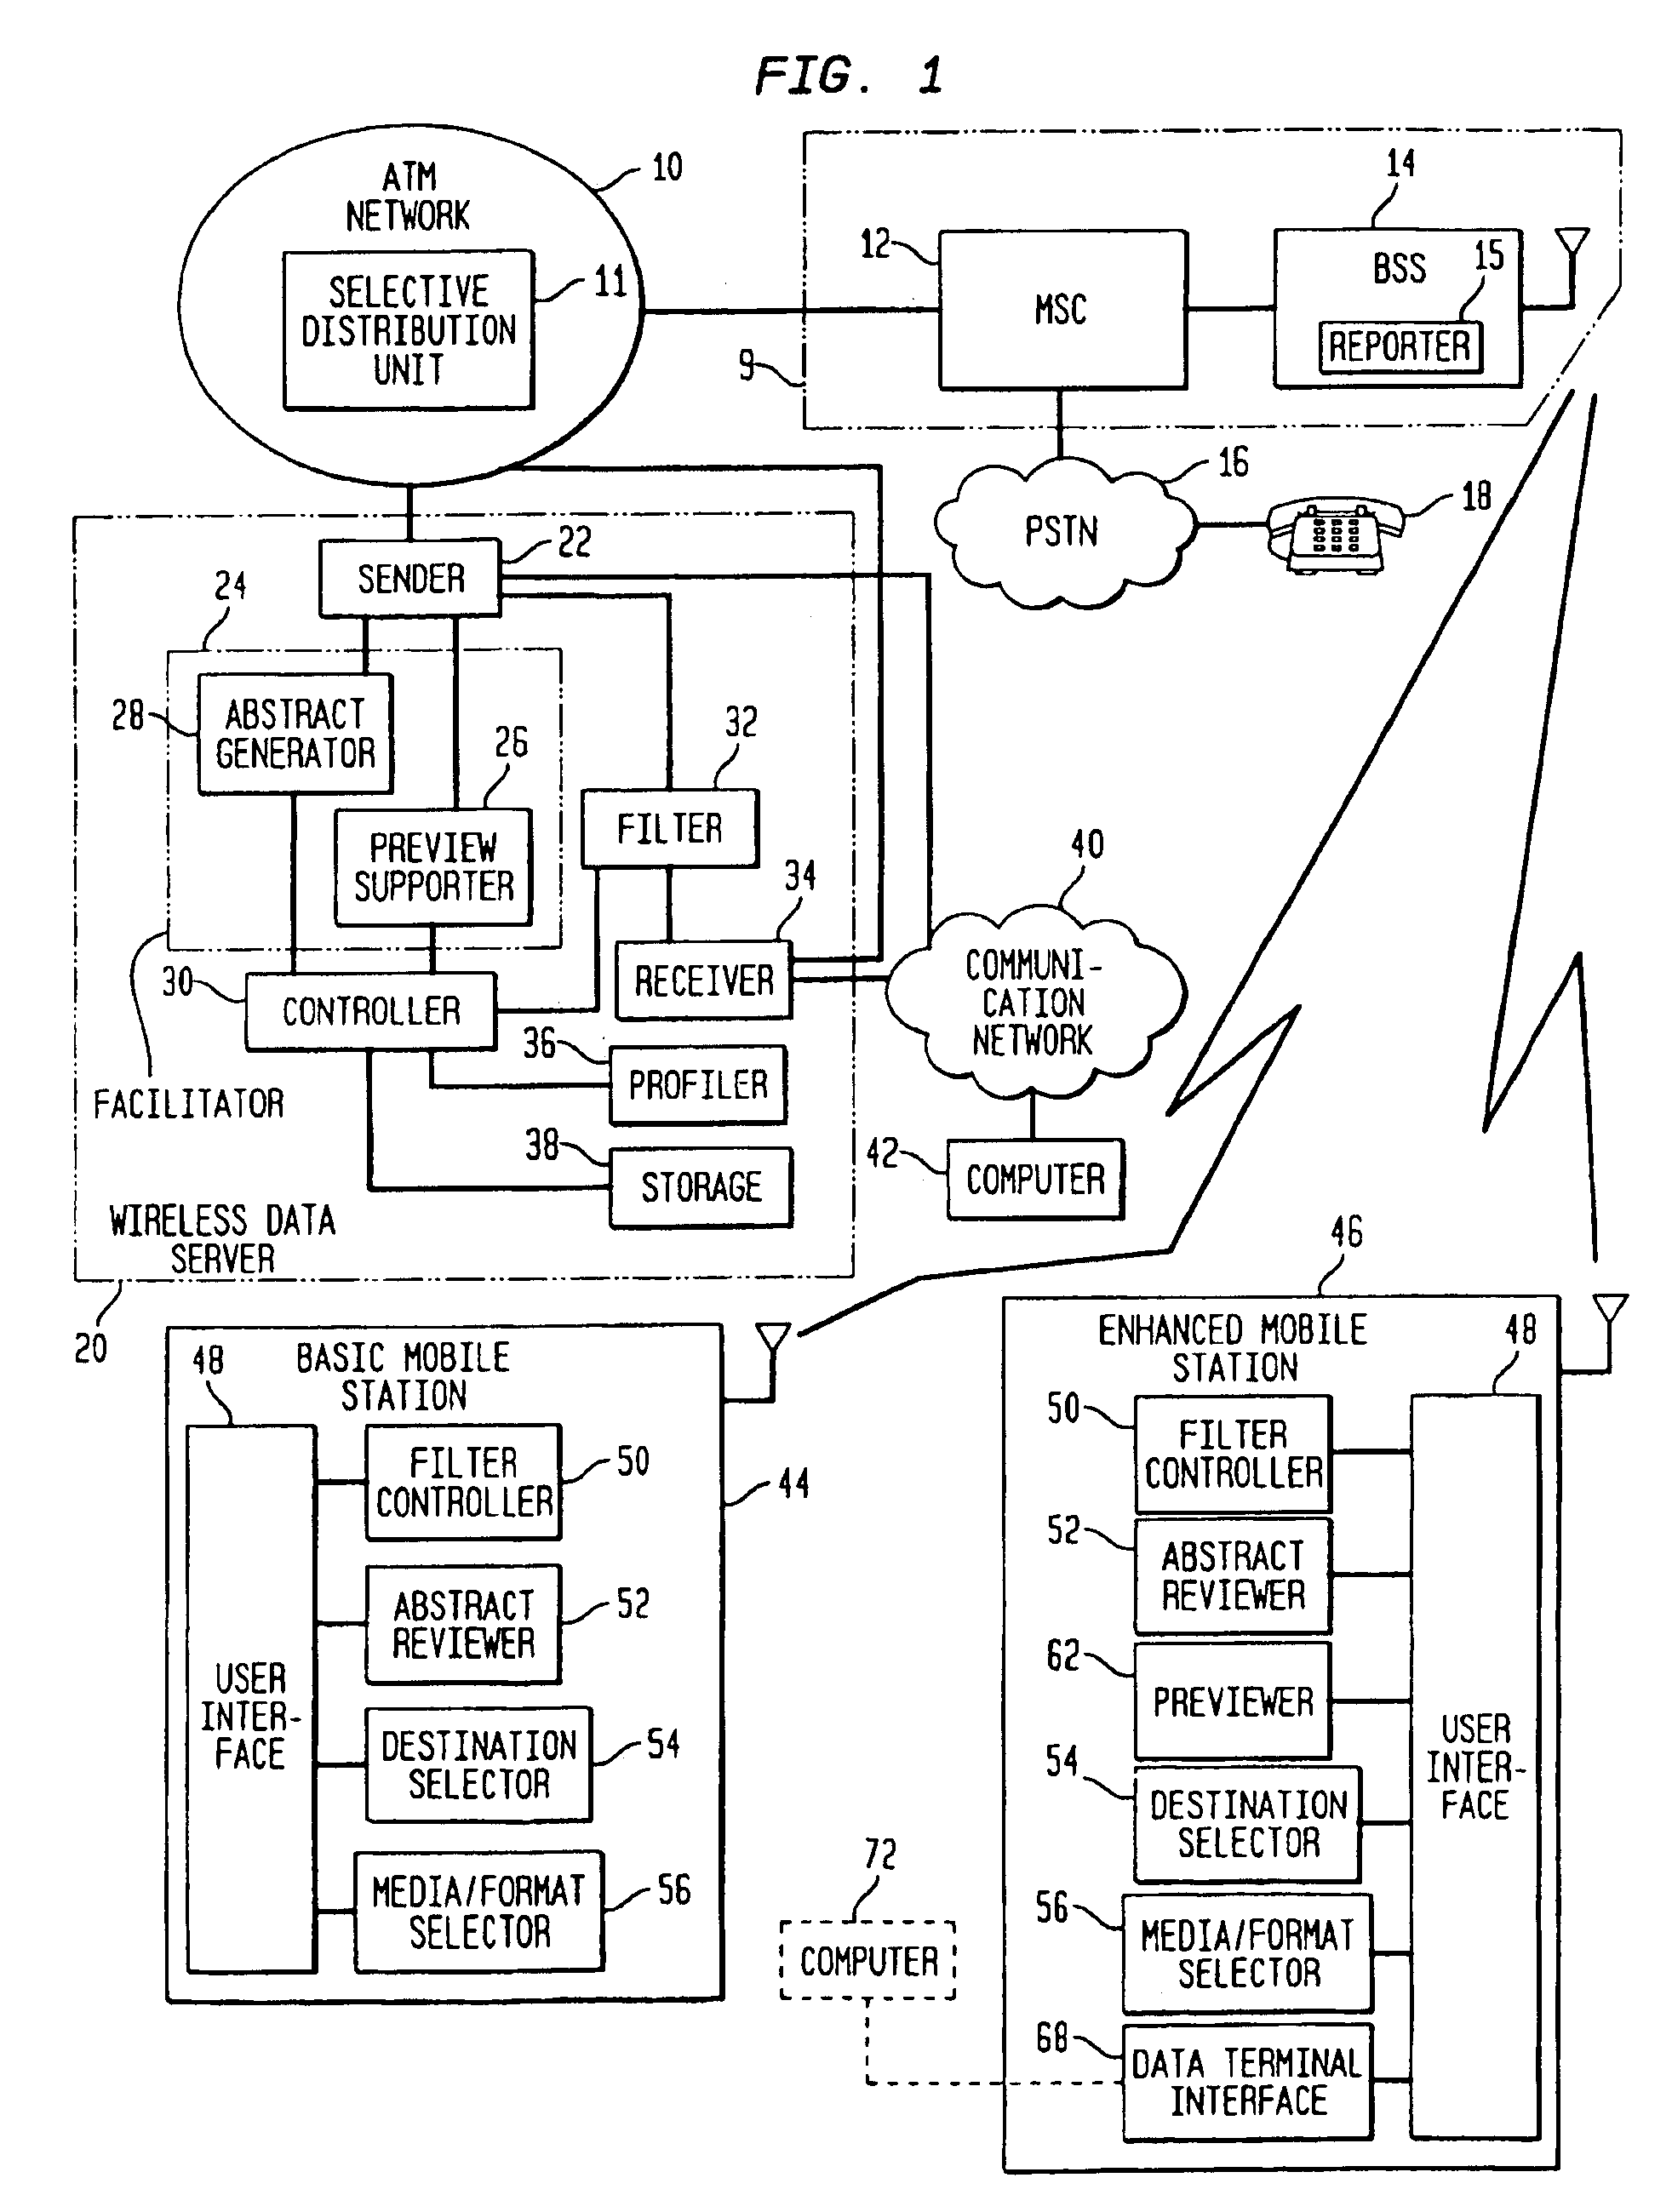 System for message control and redirection in a wireless communications network